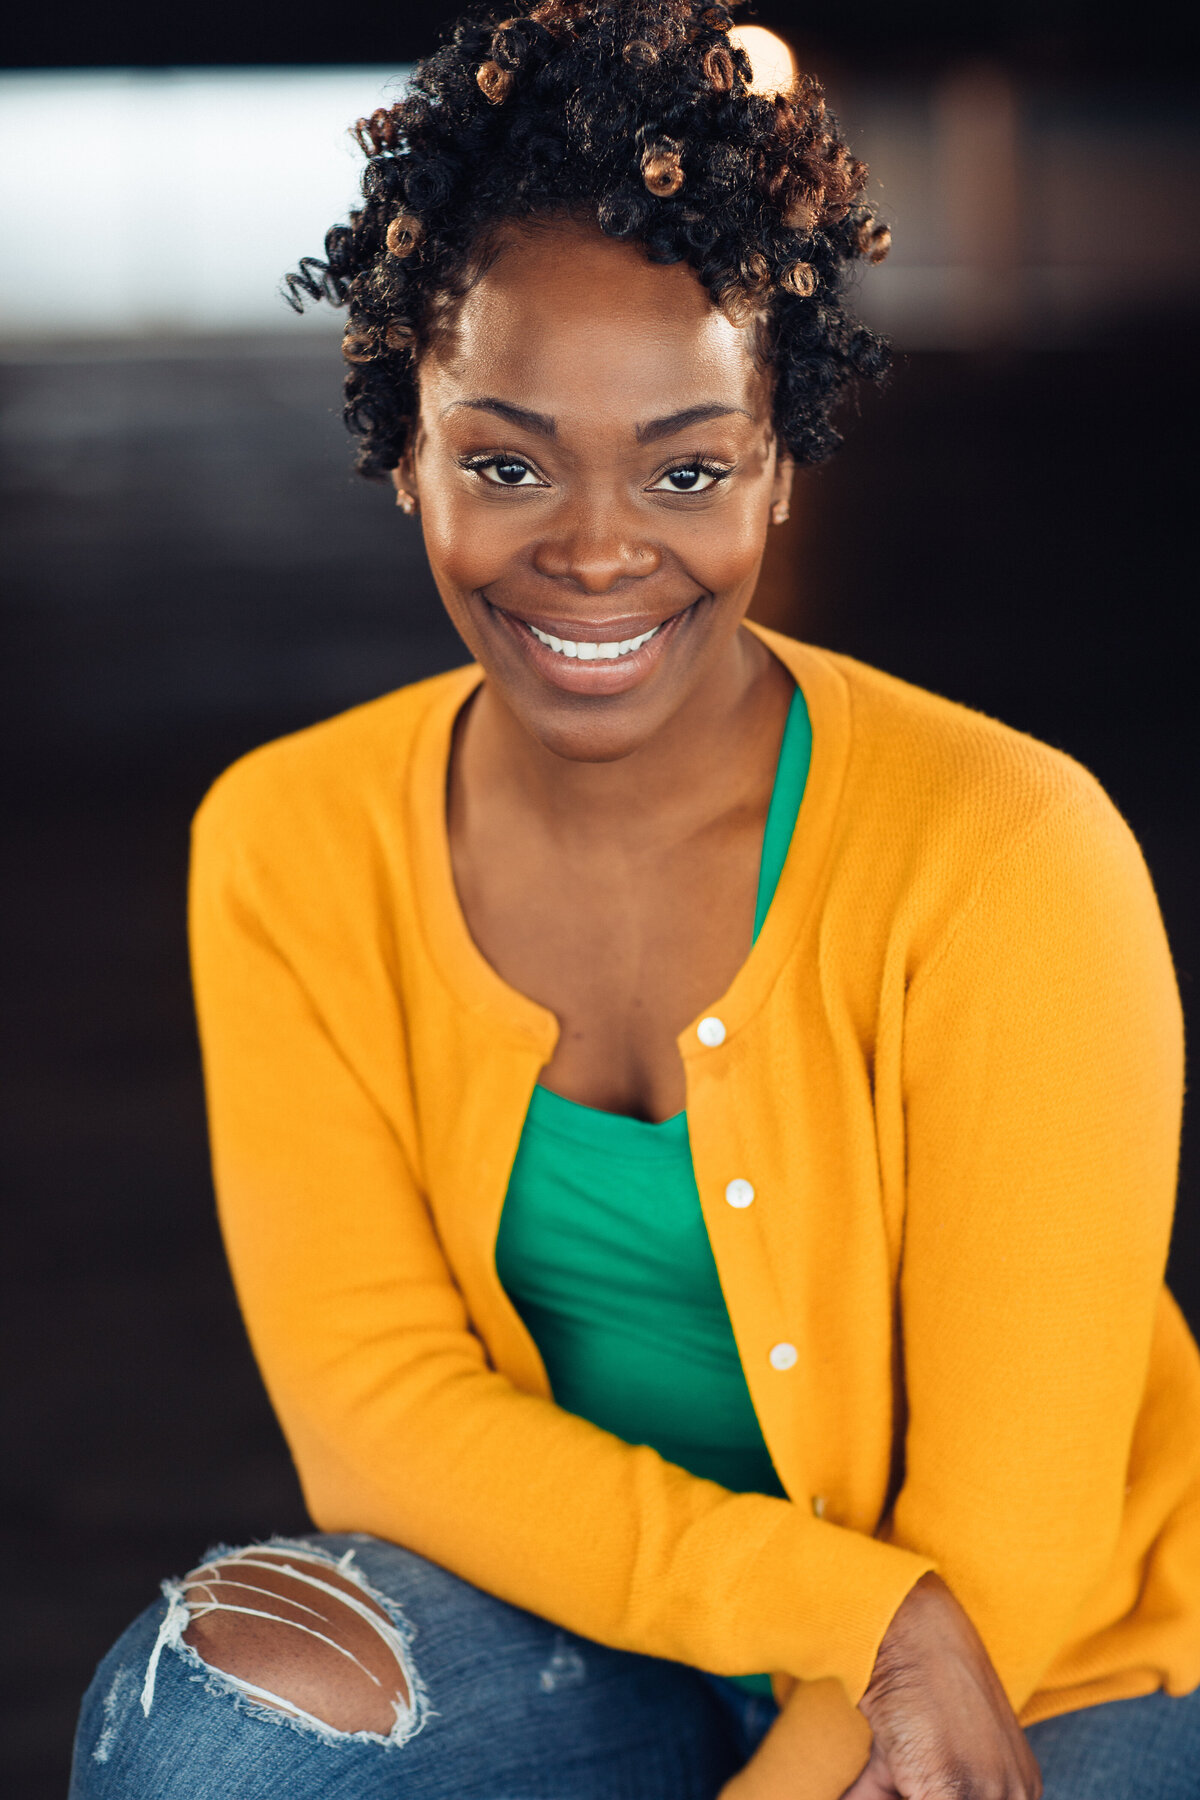 Headshot Photograph Of Young Woman In Outer Yellow Cardigan And Inner Green Tank Top Los Angeles